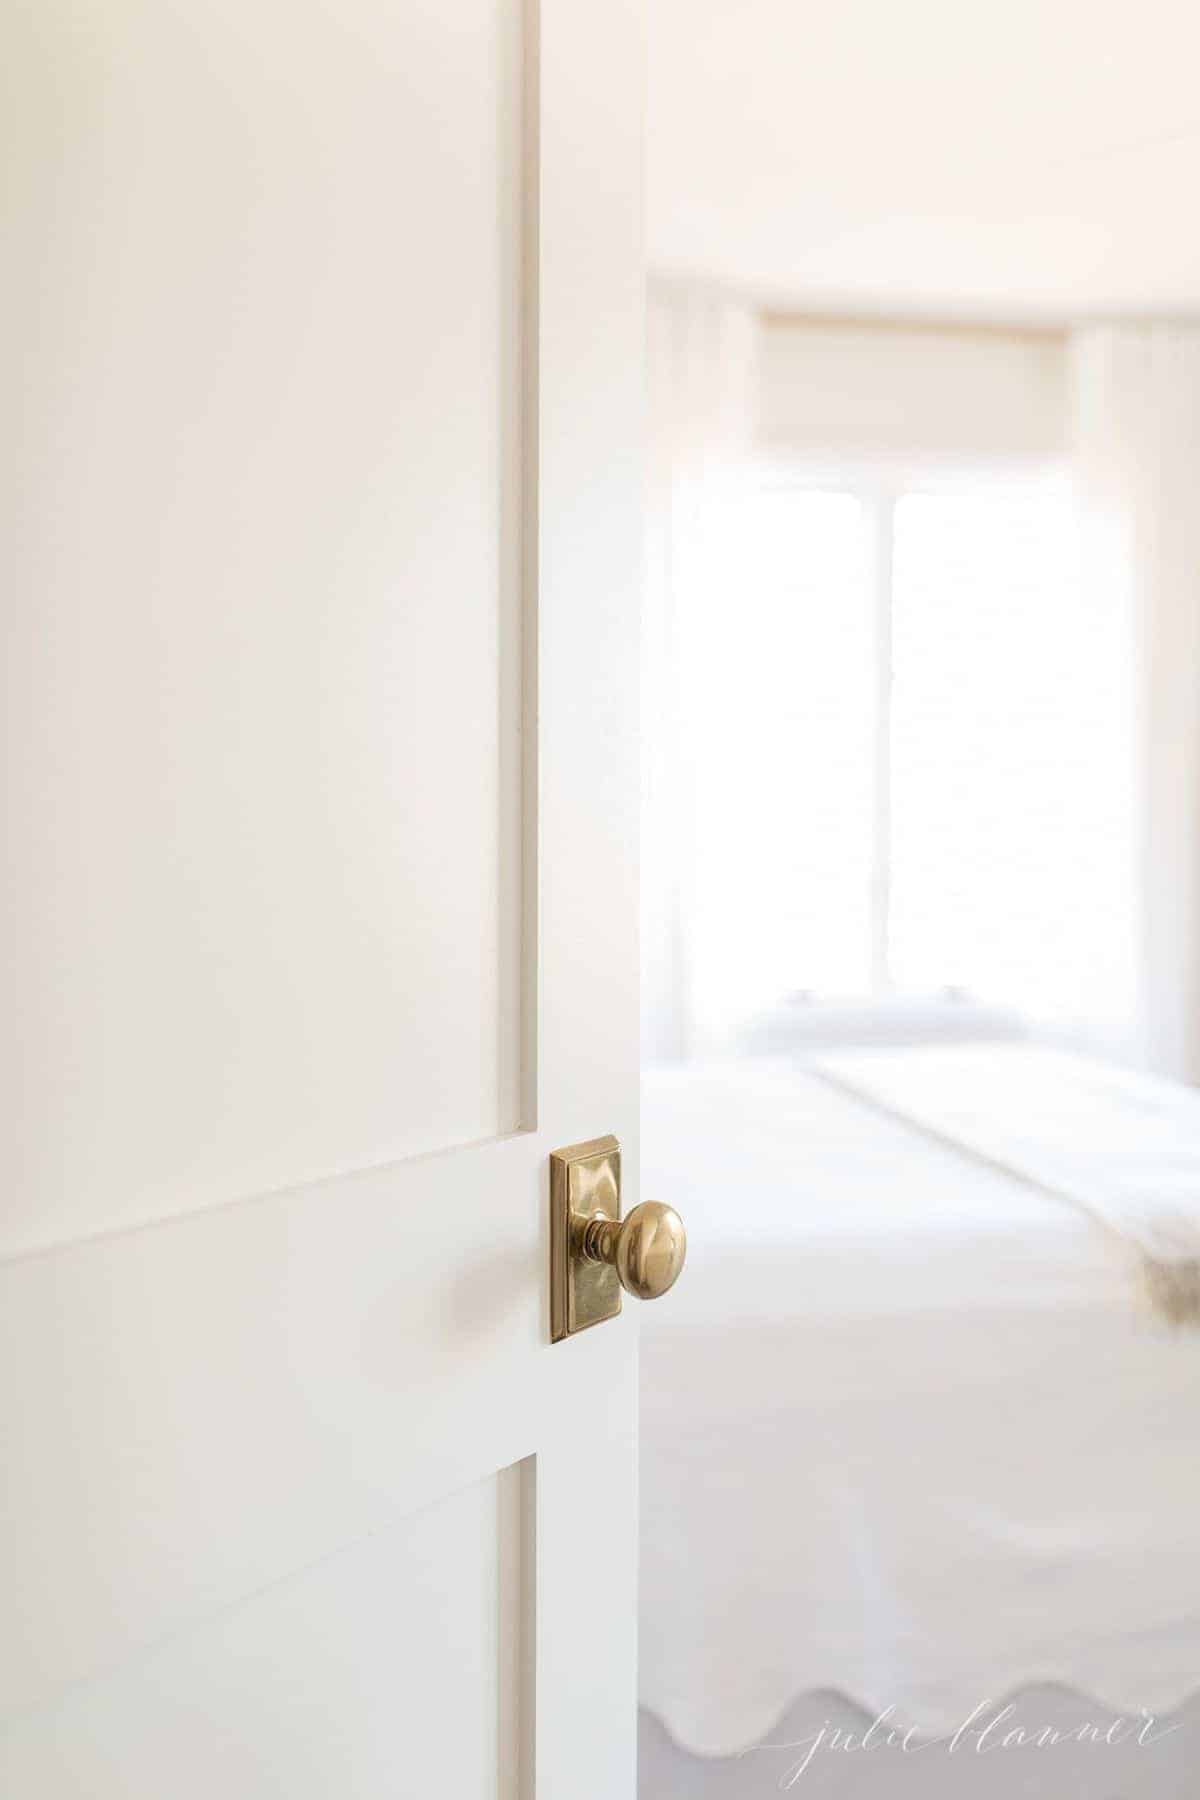 A white wooden door with a classic brass door knob opening into a bedroom.